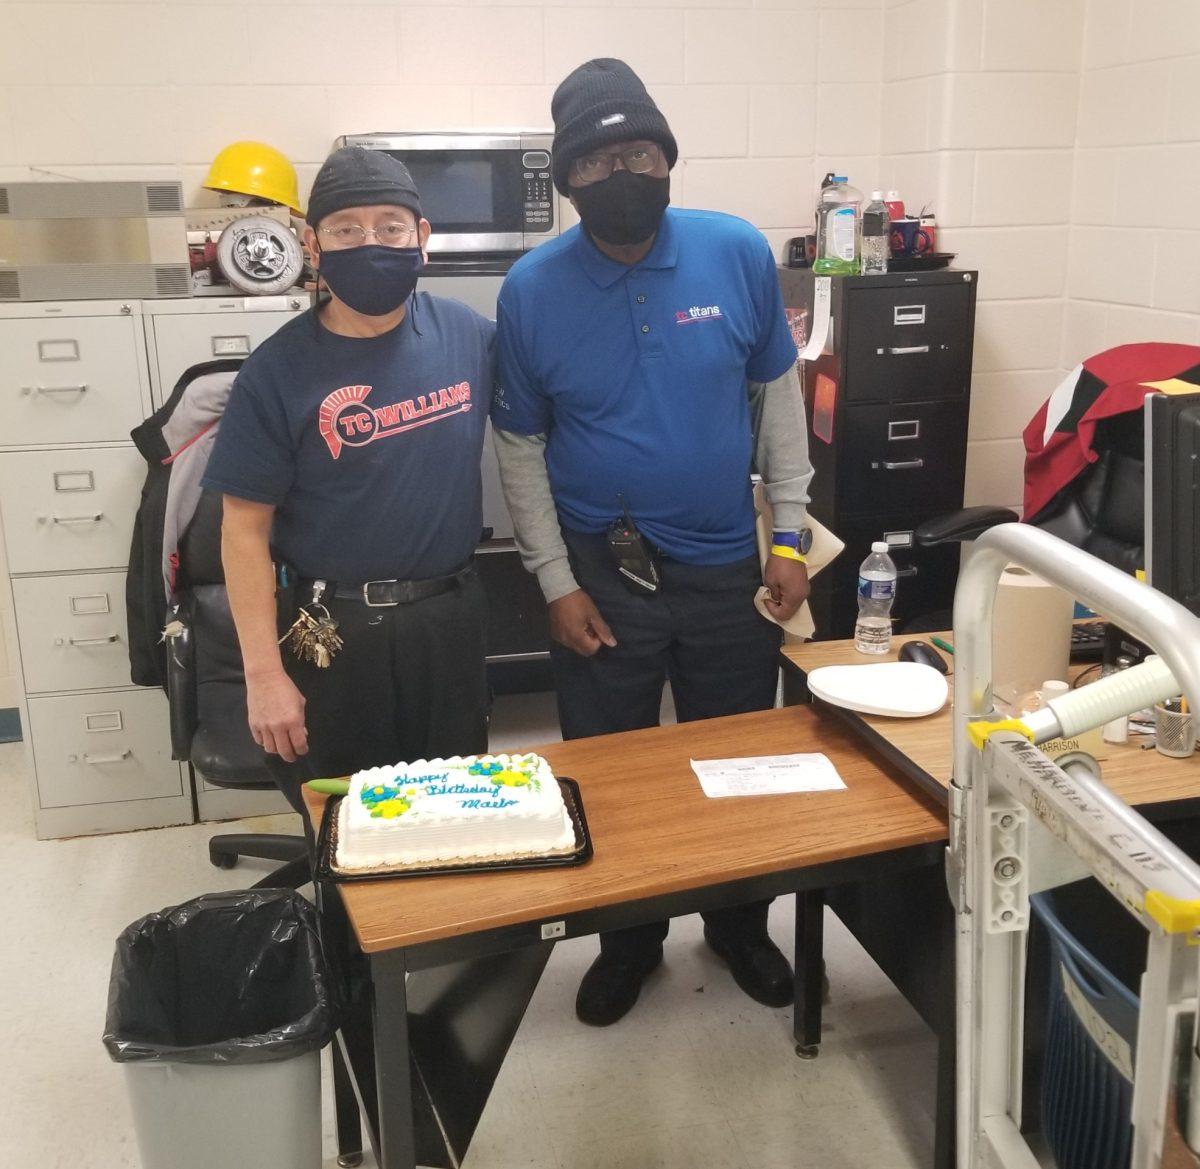 Mario Yach (left) and James Harrison (right) before cutting slices of cake to celebrate Yachs 60th birthday. 